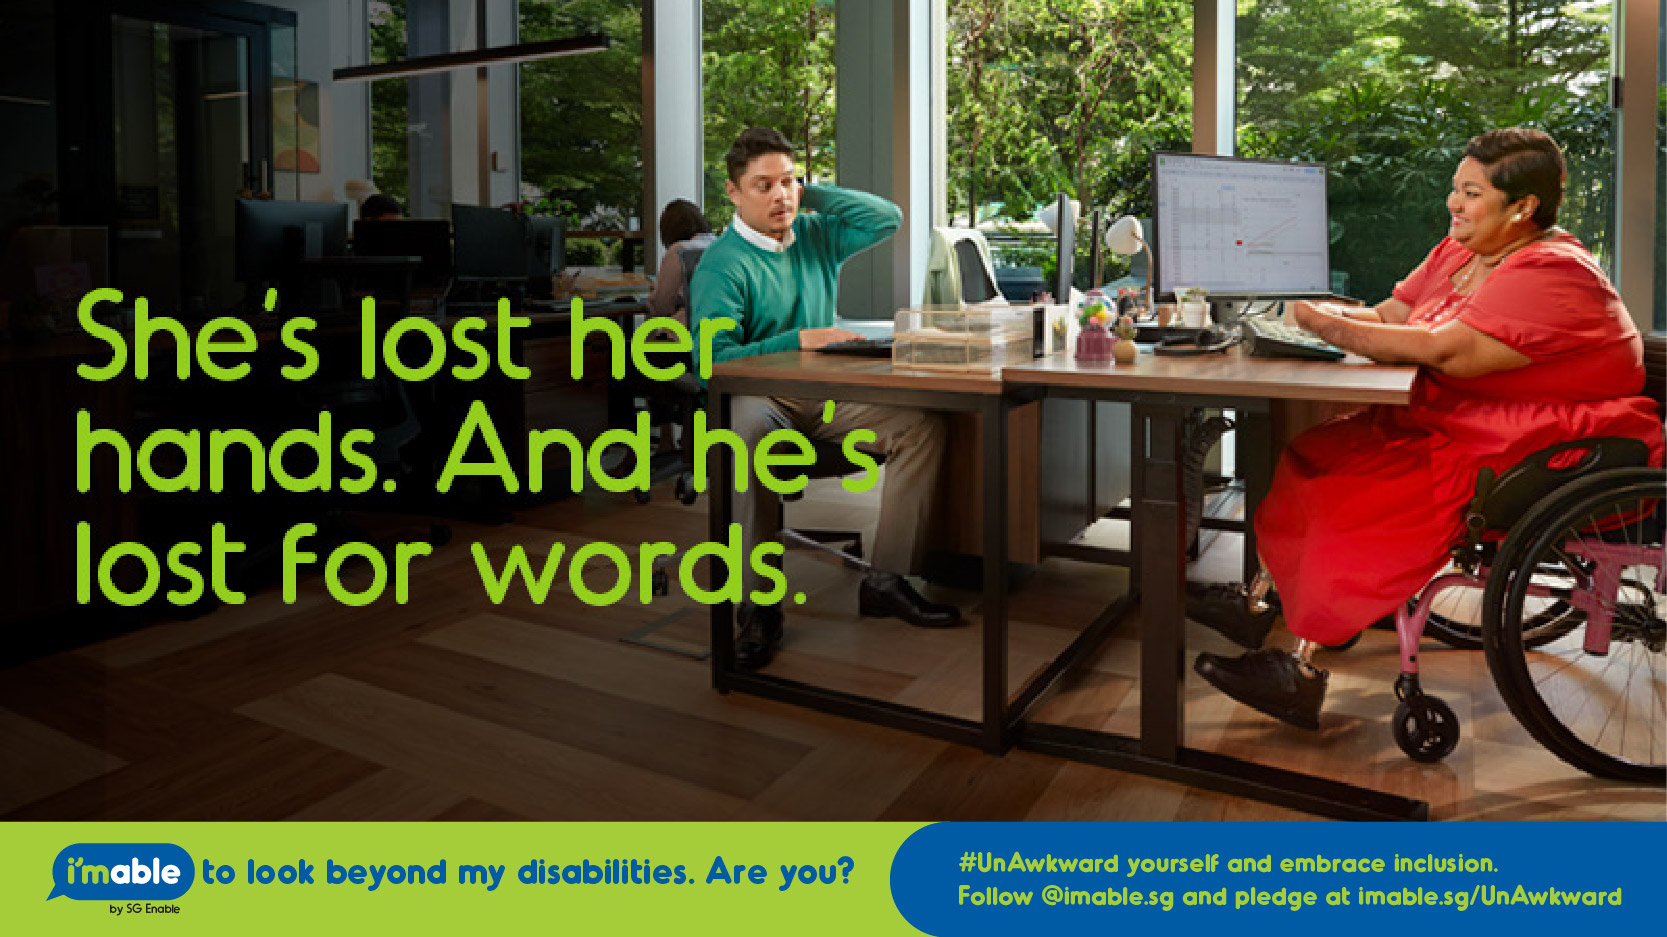 Image shows a man and woman on wheel chair in an office environment. The text reads, She's lost her hands. And he's lost for words.